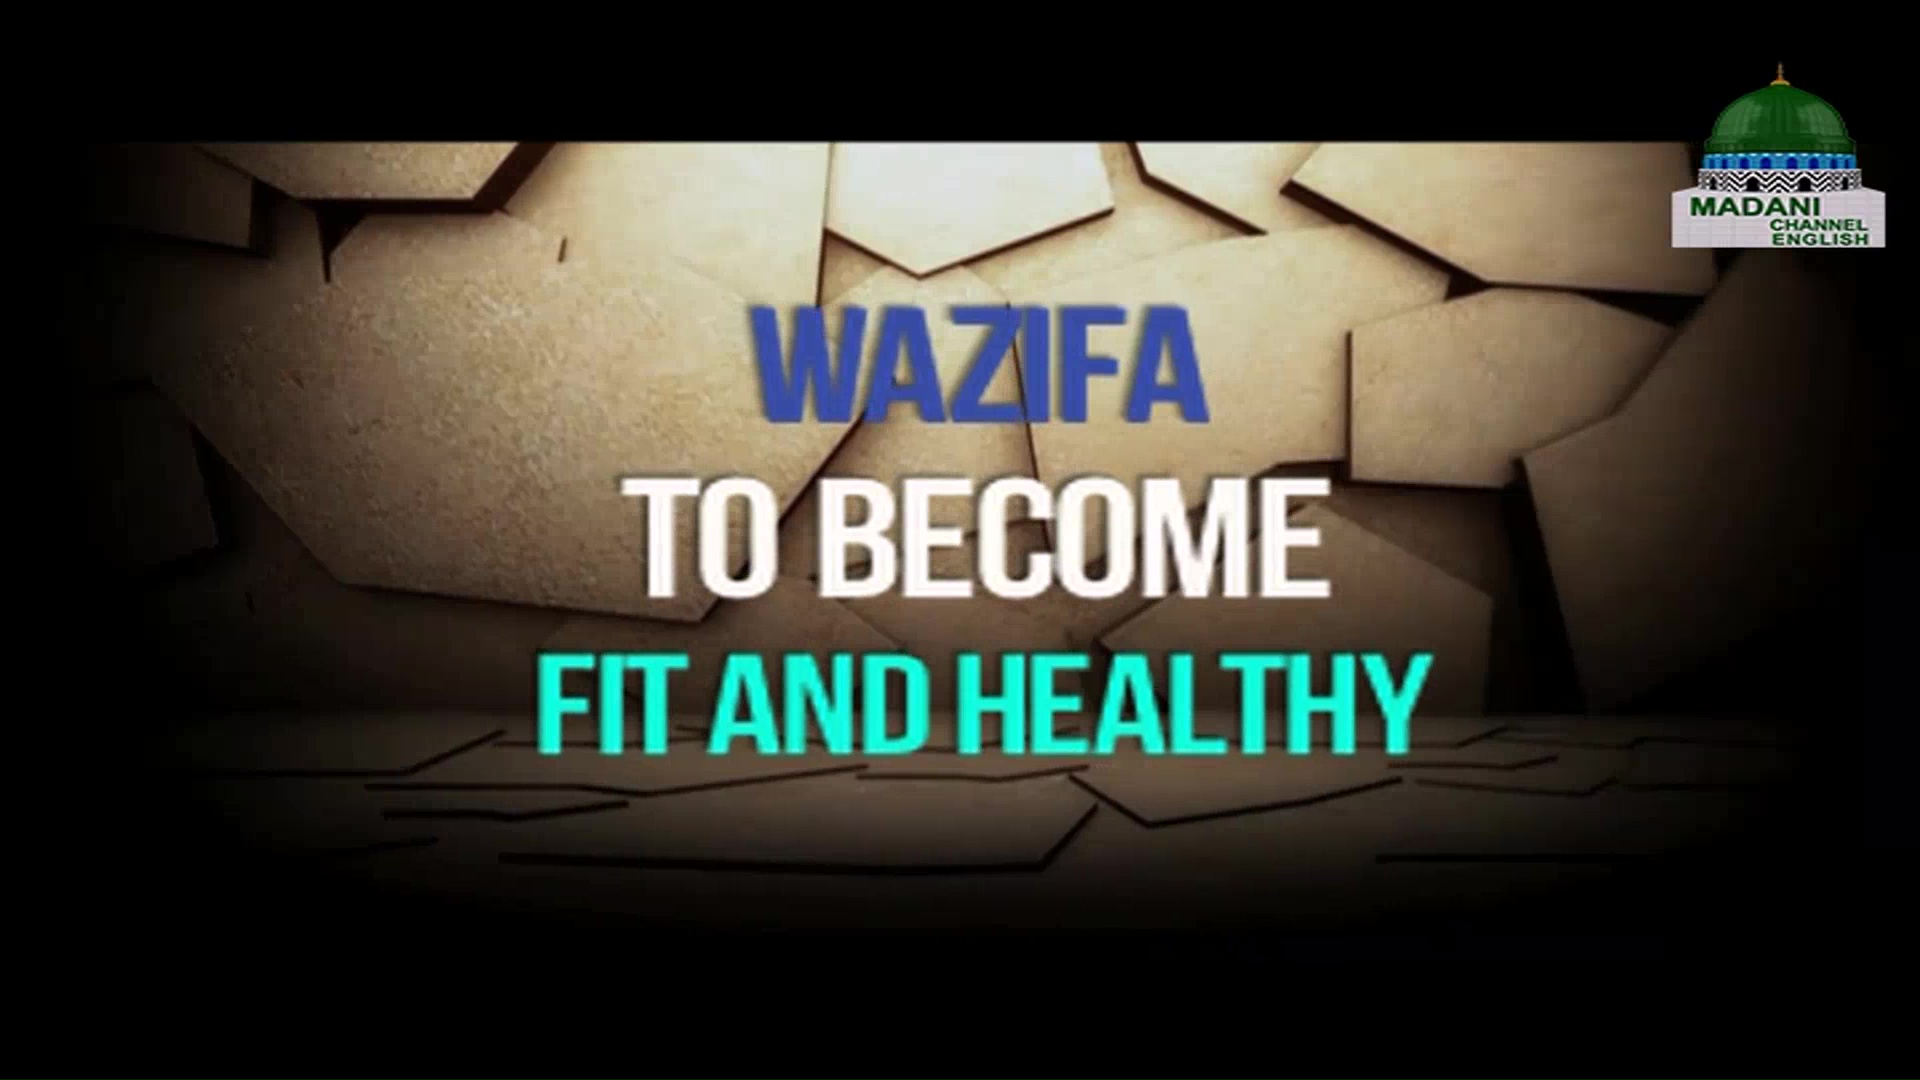  Wazifa To Becom Fit And Healthy